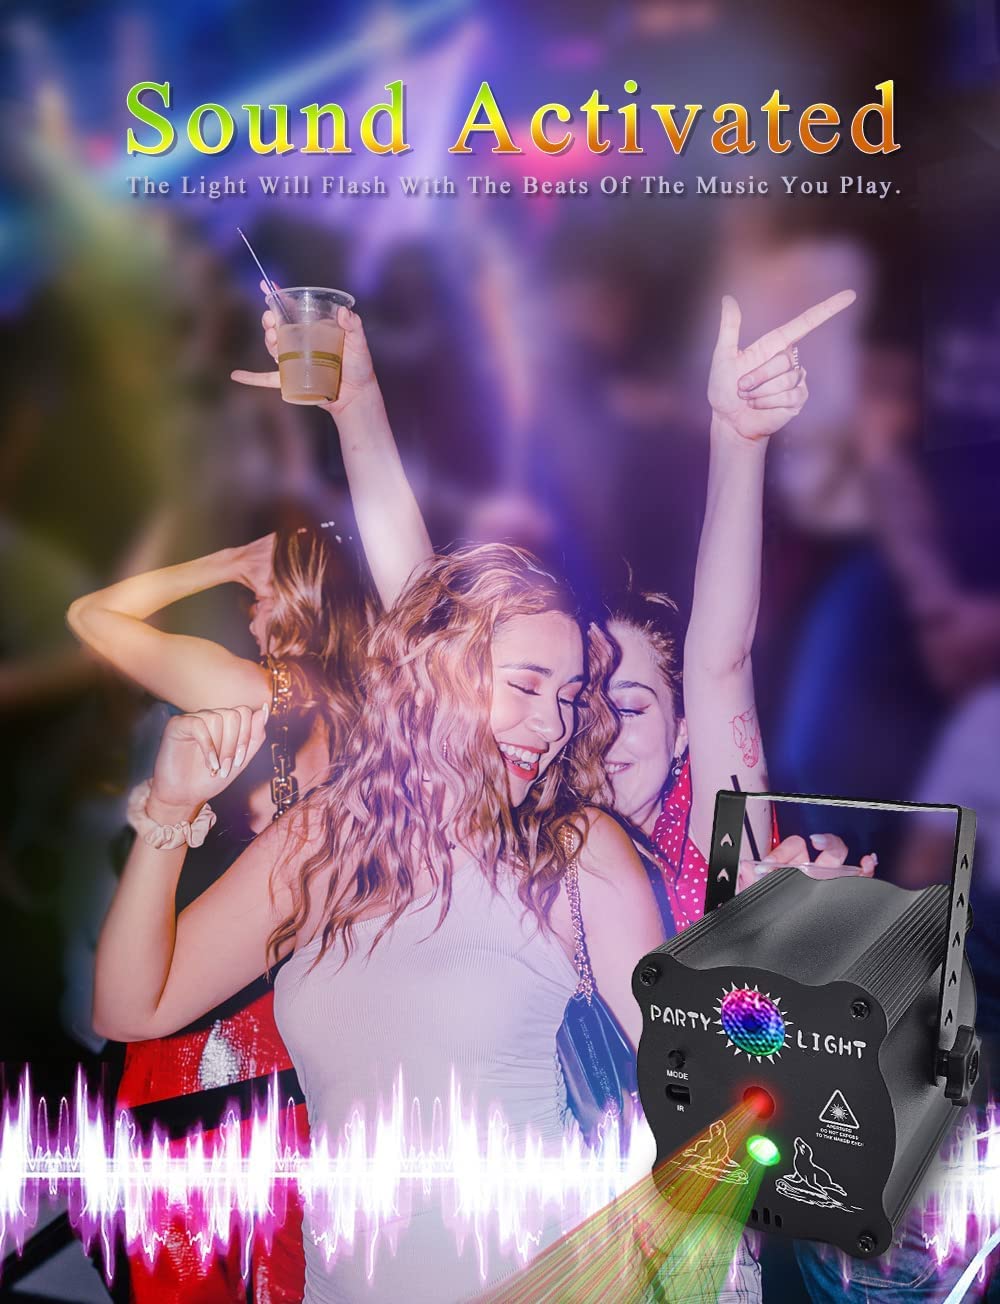 Party Lights Dj Disco Lights, Sound Activated Lights with Remote Control for Dance Party Karaoke Living Room Pub